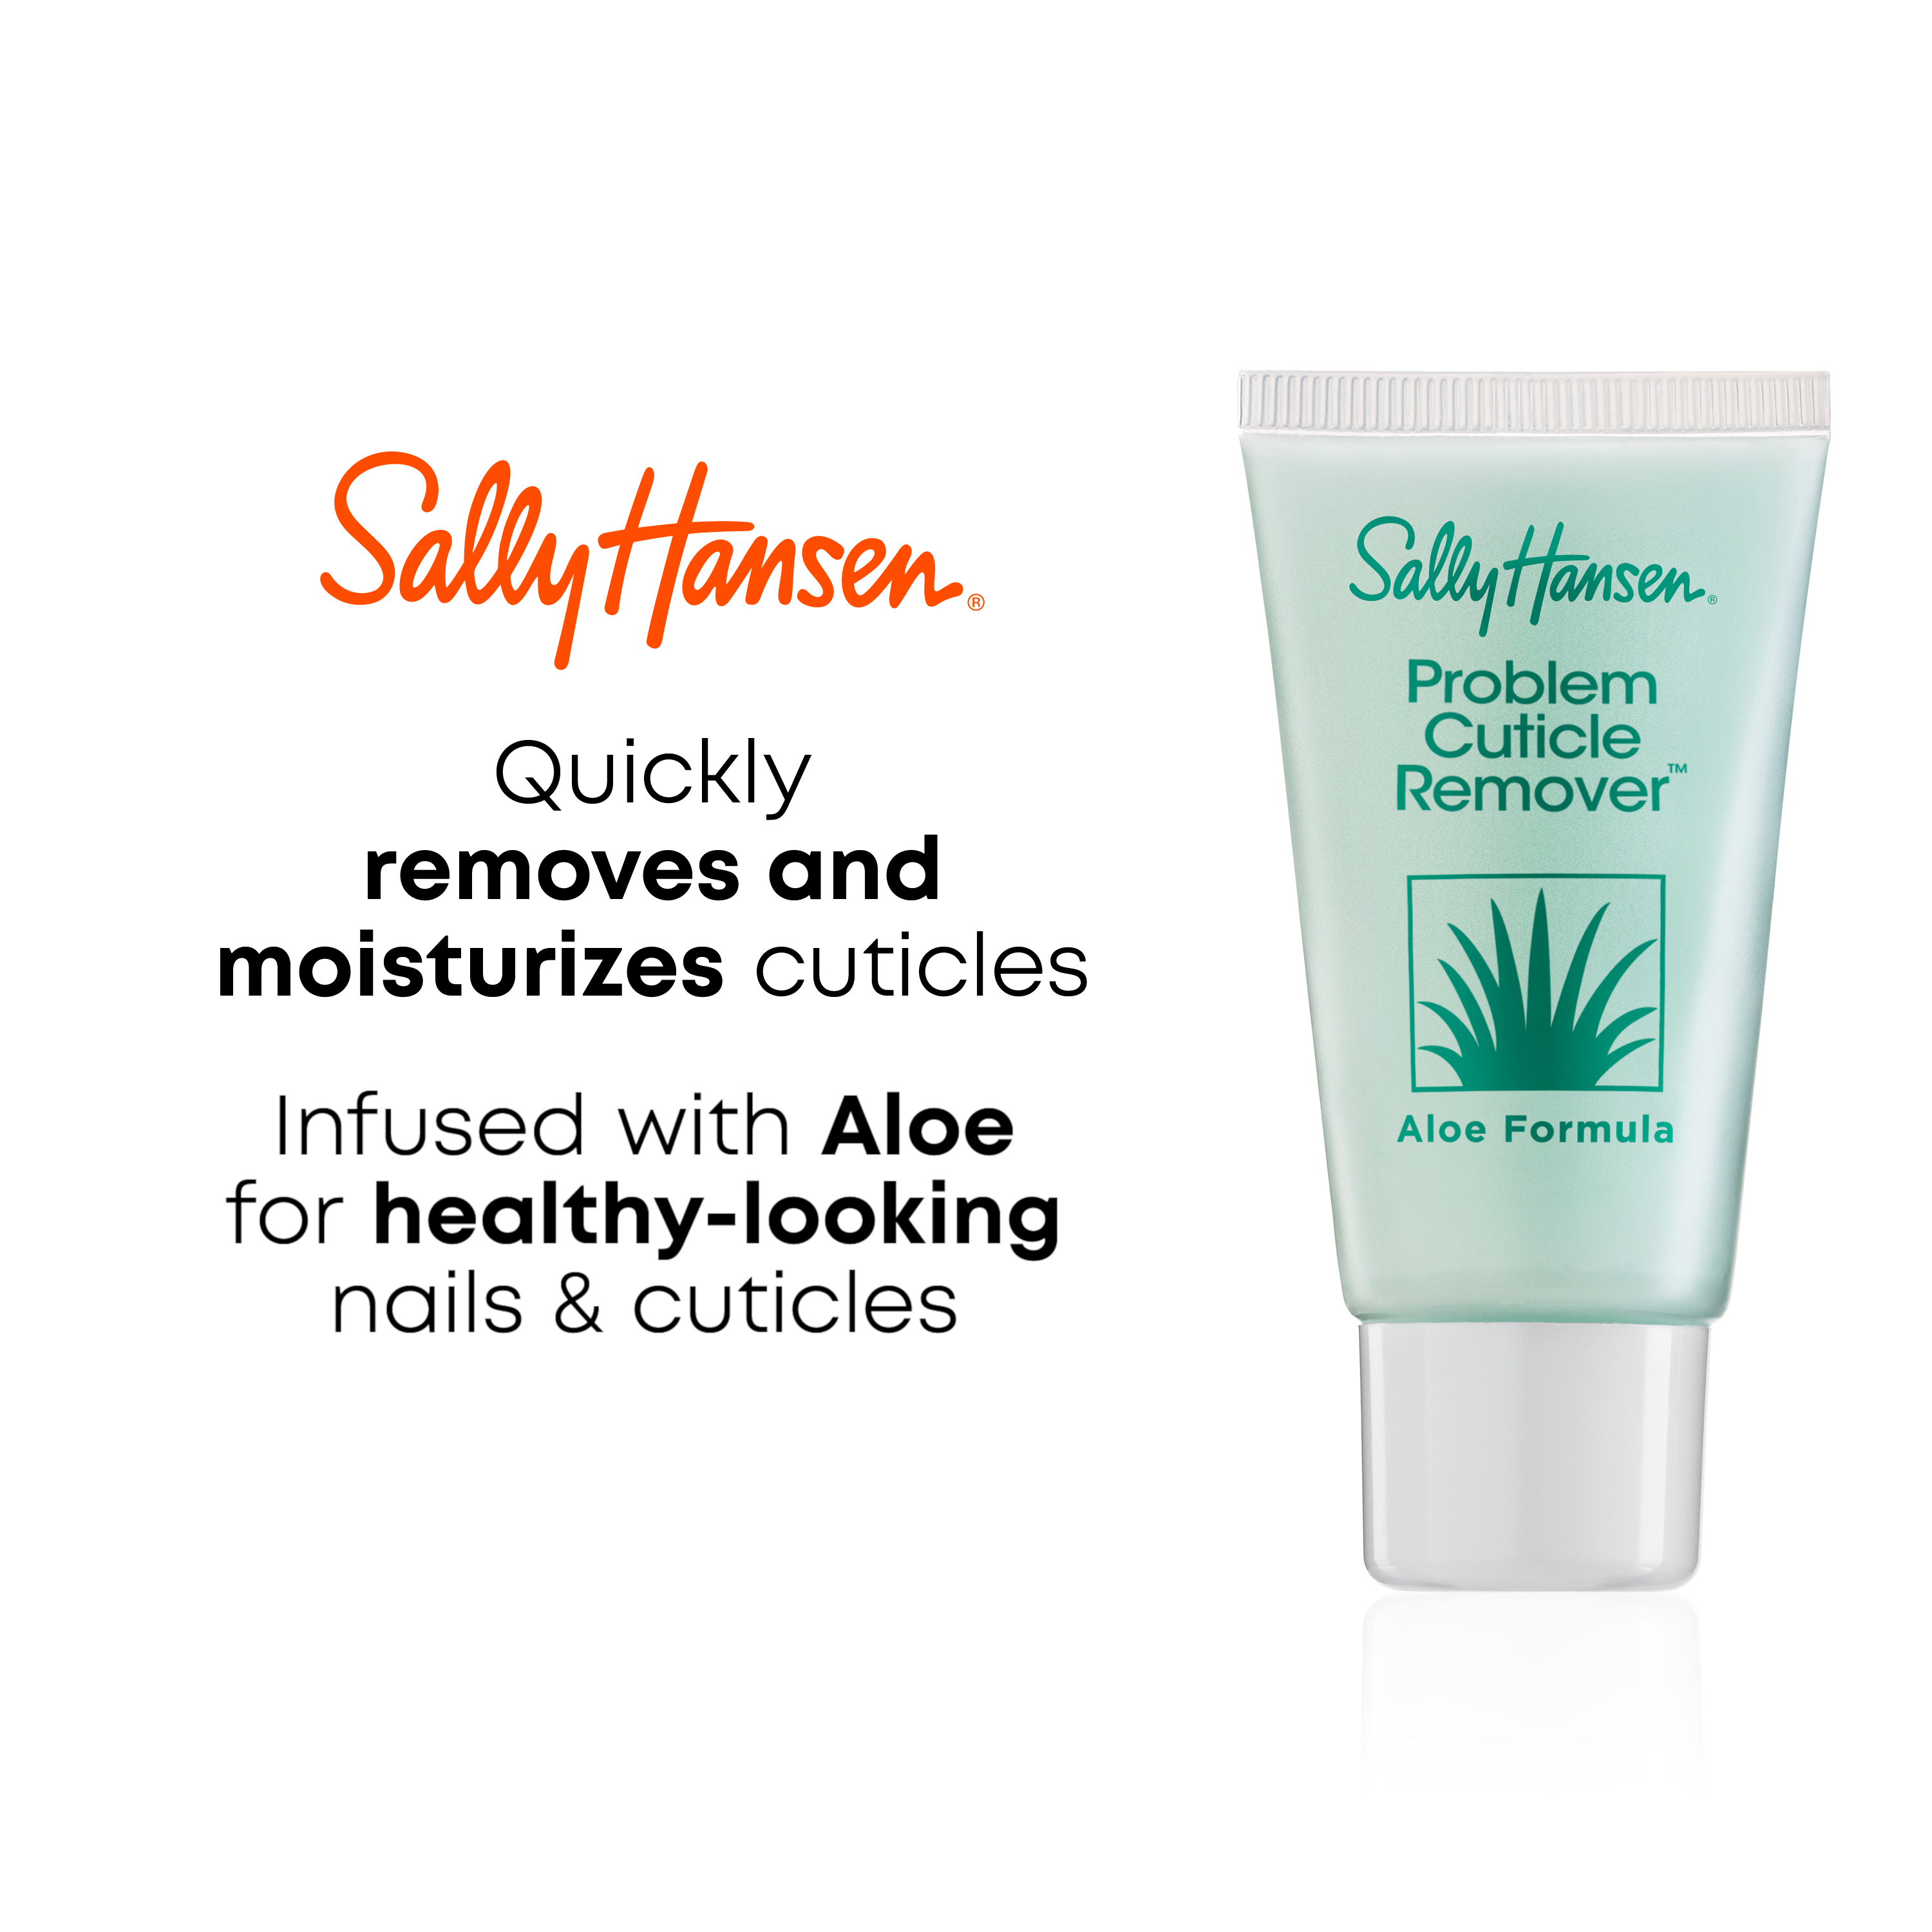 Sally Hansen Problem Cuticle Remover™, Eliminate Thick & Overgrown Cuticles, 1 Oz, Cuticle Remover Cream, Cuticle Remover Gel, Ph Balance Formula, Infused with Aloe Vera to Soothe and Condition - image 3 of 3